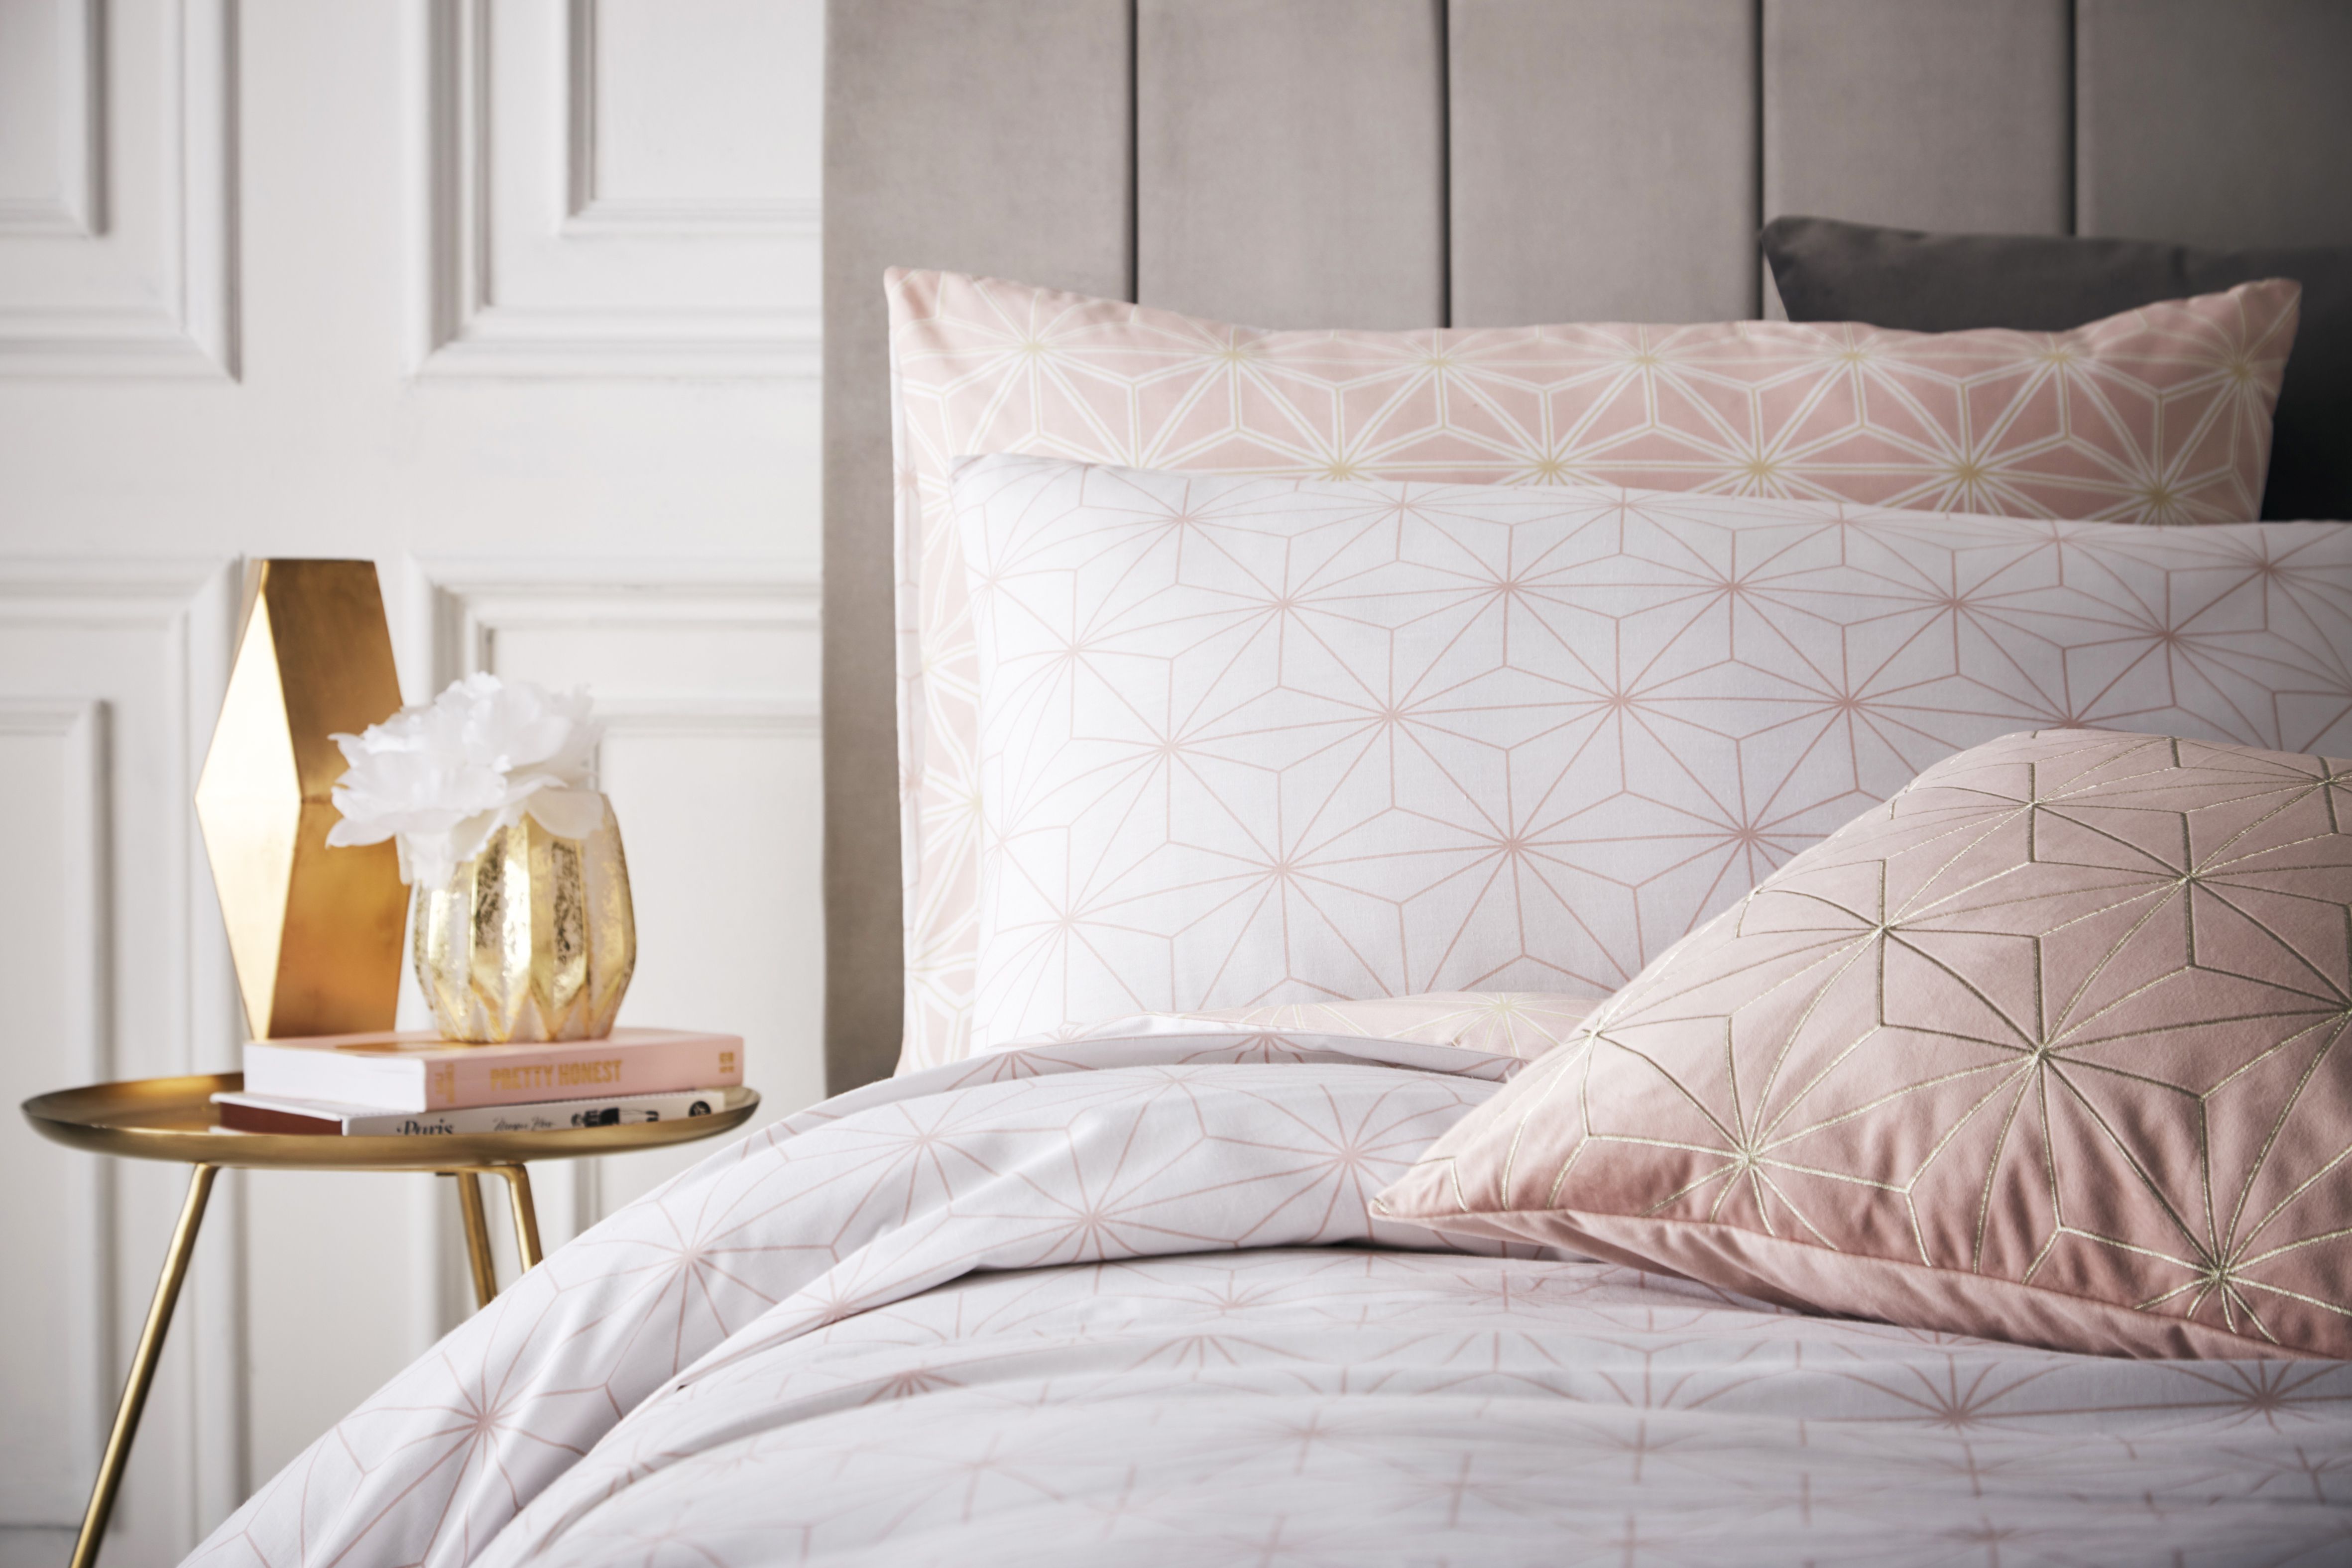 Stylish and versatile geometric stars in subtle blush and gold. An ombre effect brings a unique twist to this linear look. The star geometric print continues across the reverse in a tonal colourway.